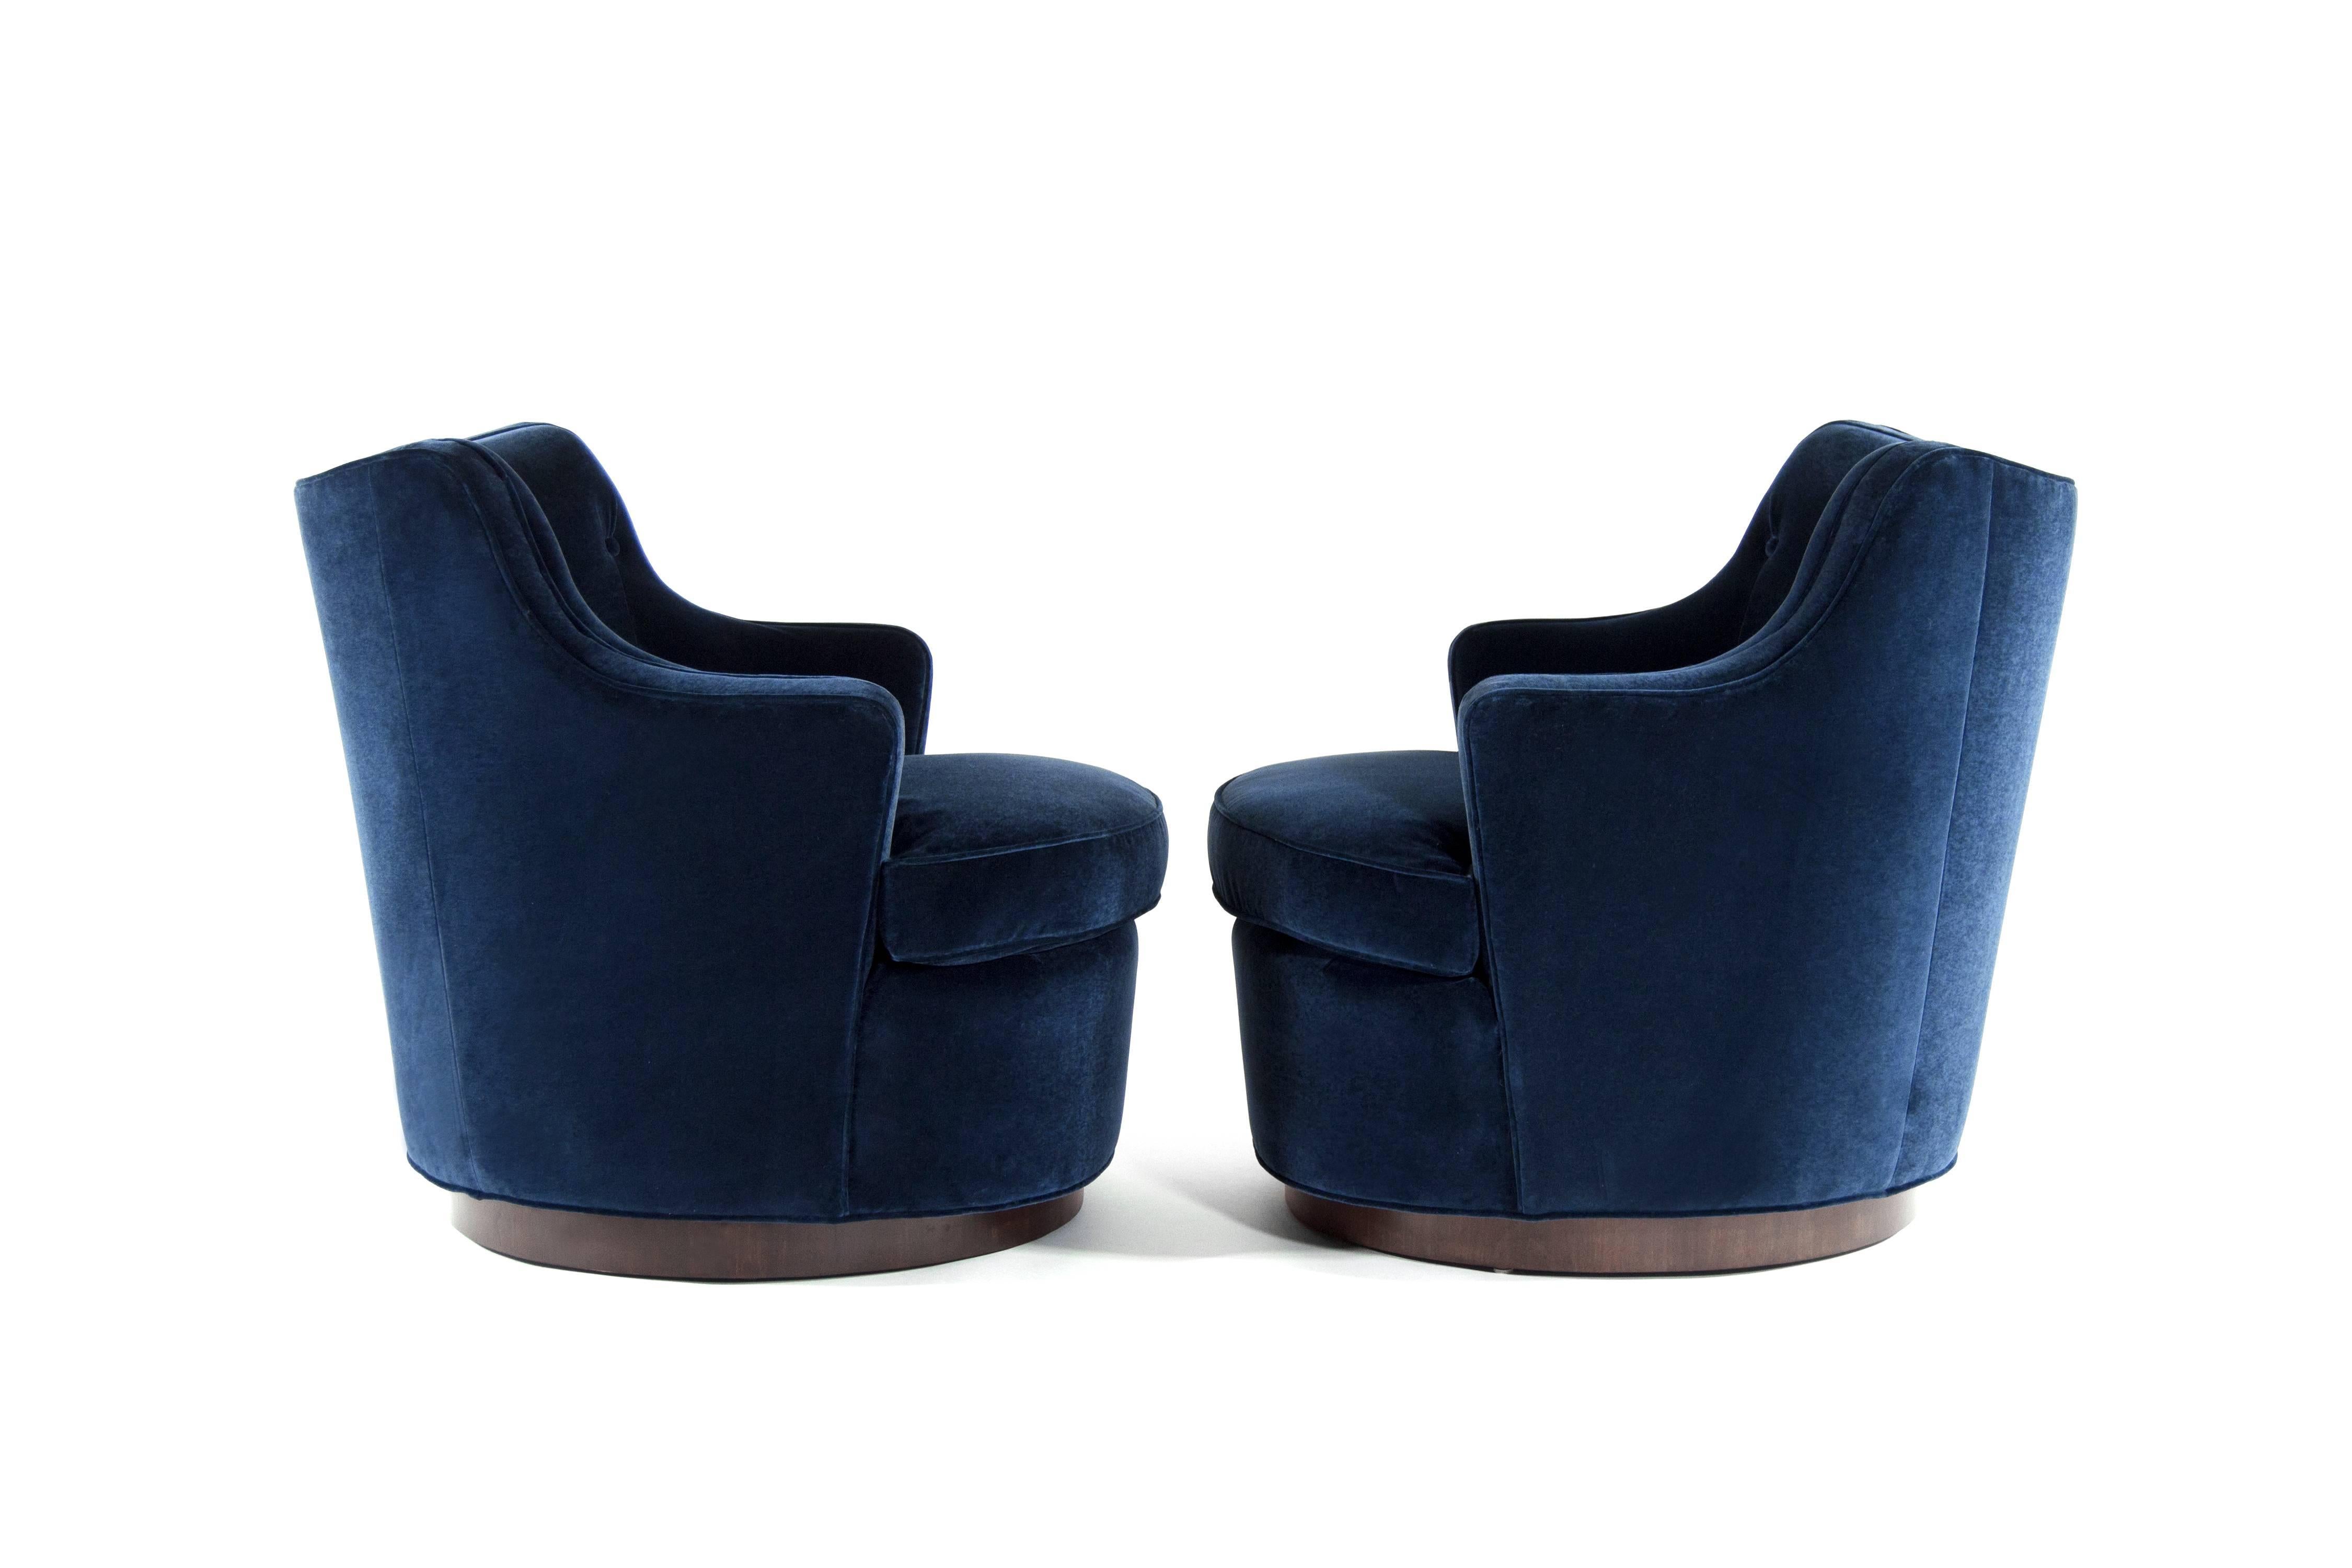 Pair of swivel chairs designed by Edward Wormley for Dunbar model 4626, circa 1950s.

Newly upholstered in navy blue velvet, walnut base fully restored.